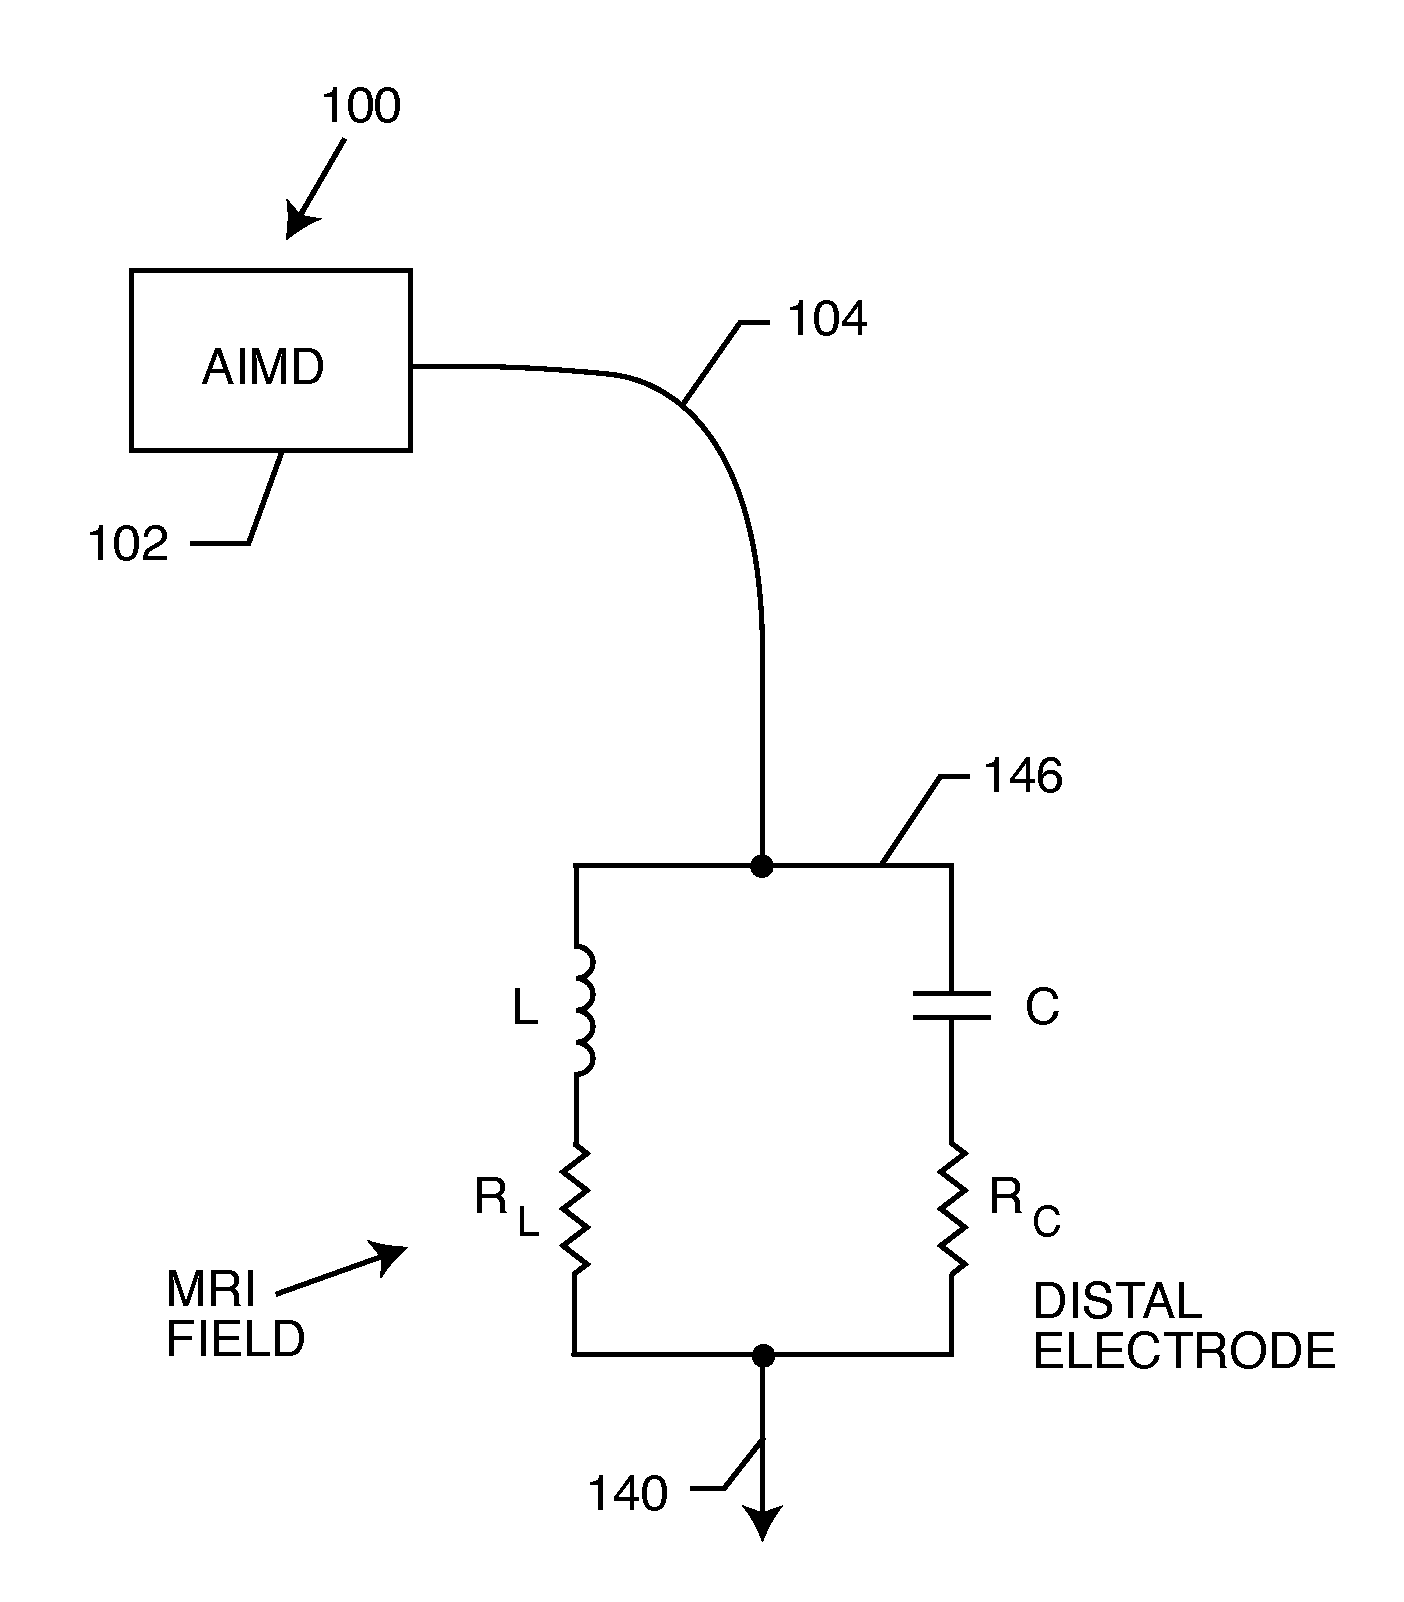 EMI filter employing a capacitor and an inductor tank circuit having optimum component values